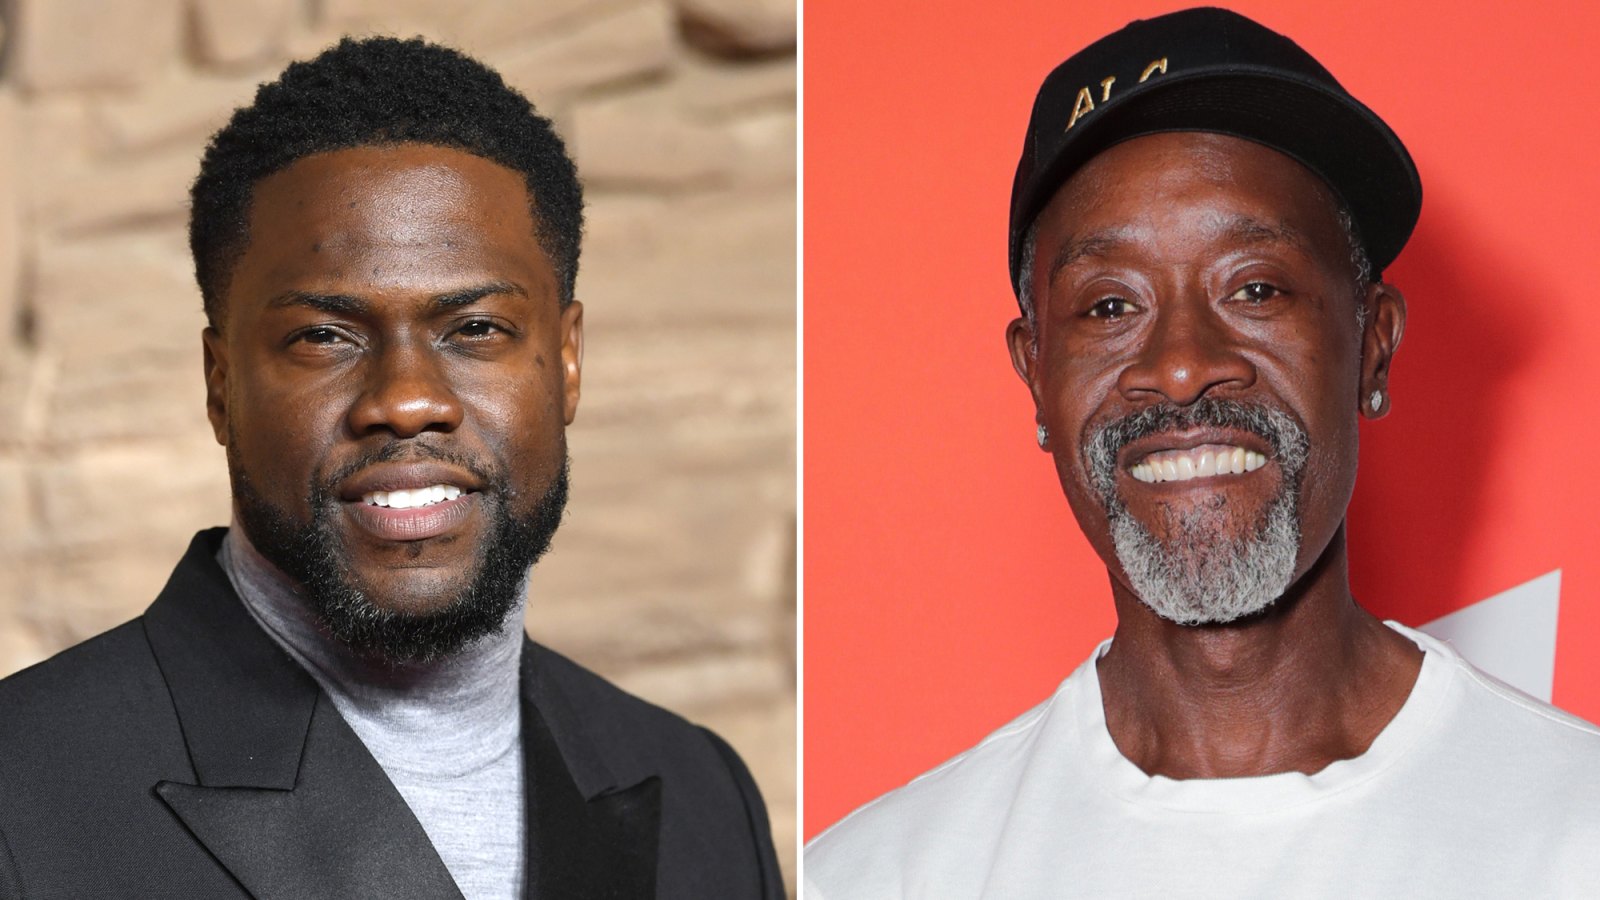 'Damn!' Kevin Hart’s Unfiltered Reaction to Learning Don Cheadle’s Age Is Going Viral